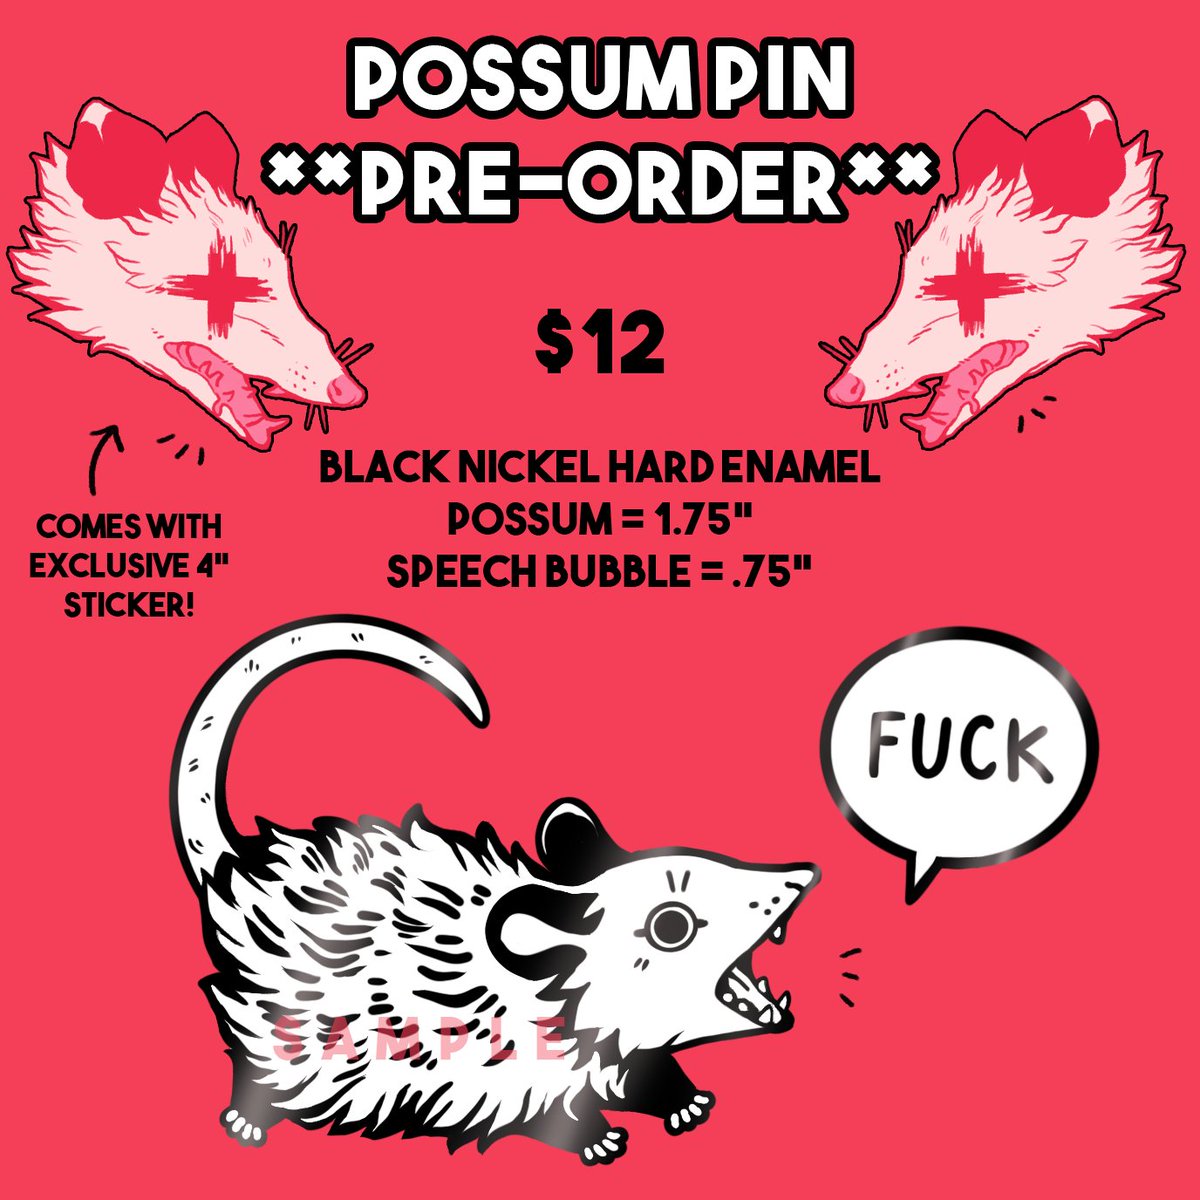 Pre-Orders for some new possum pins as well as restock preorders for the wolf pins are now up and will close on June 22nd! Both come with exclusive stickers and the wolf pin will be GLOW IN THE DARK this time around!! Link to order below! 